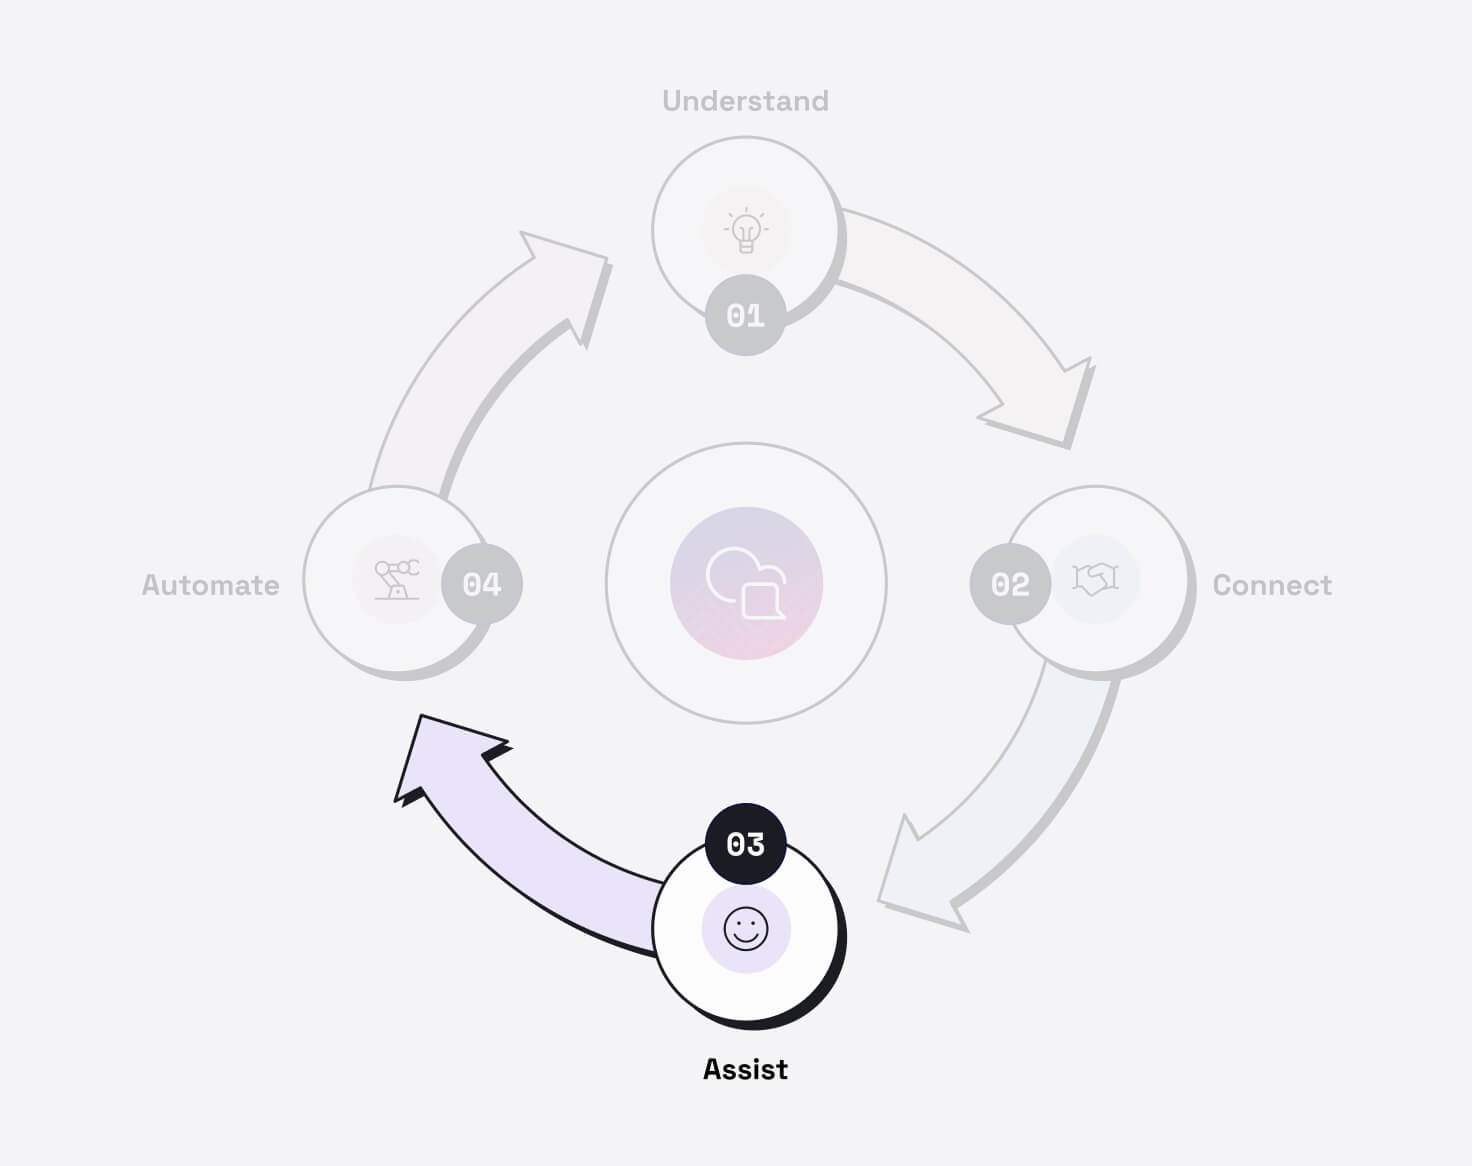 Step 3 of the flywheel, focusing on key features that act as virtual assistants to human agents